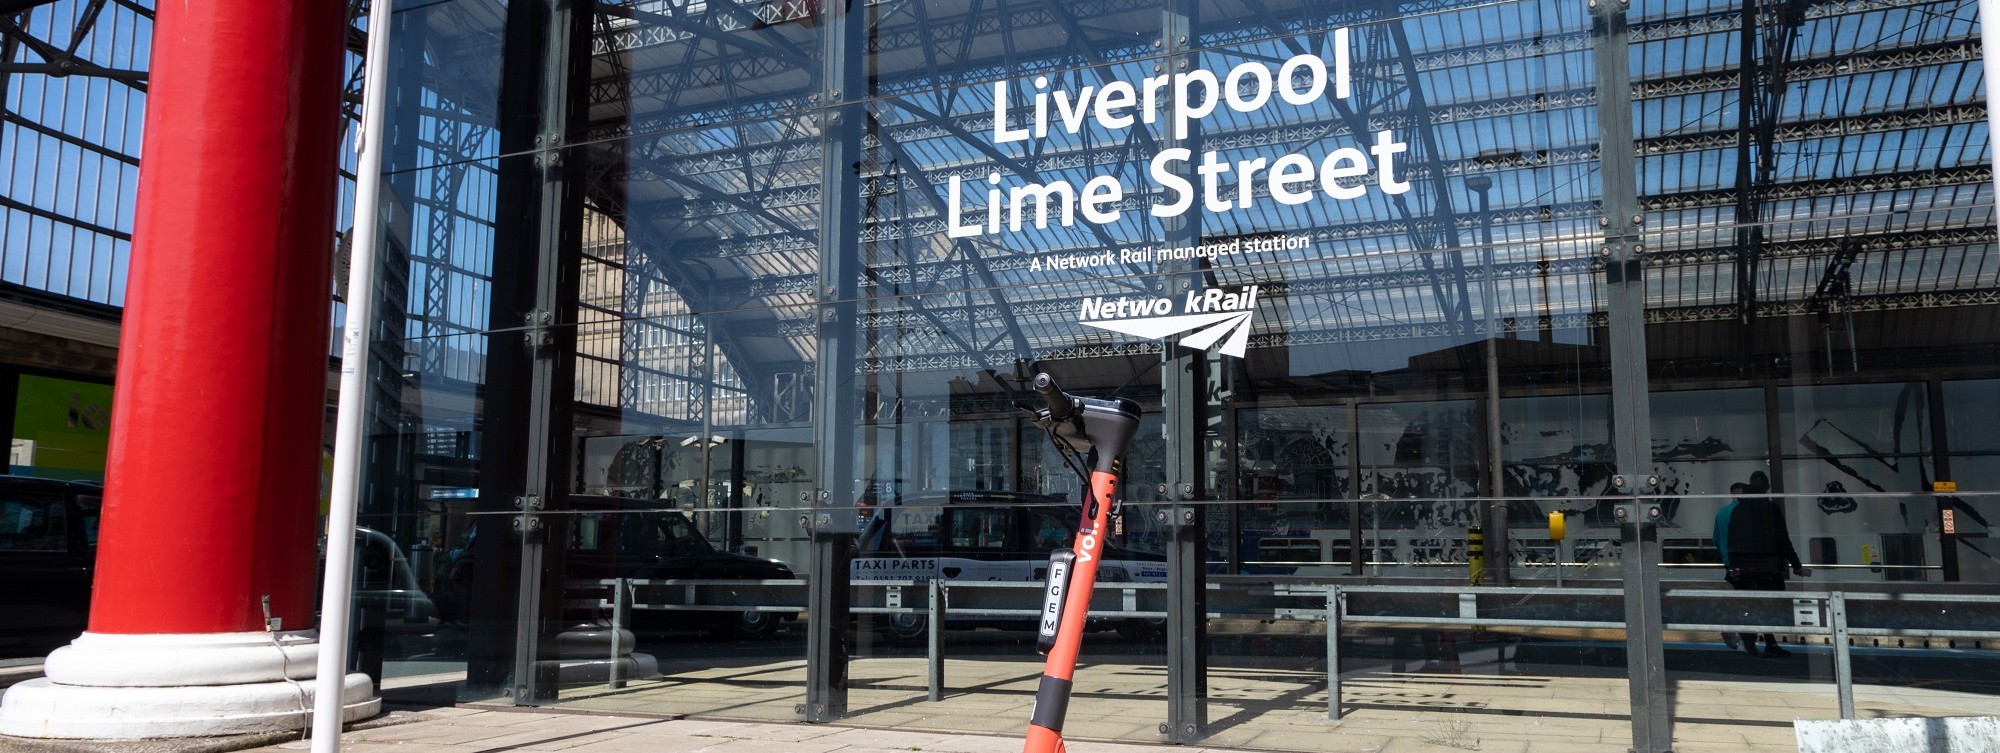 image-shows-voi-scooter-outside-liverpool-lime-street-station